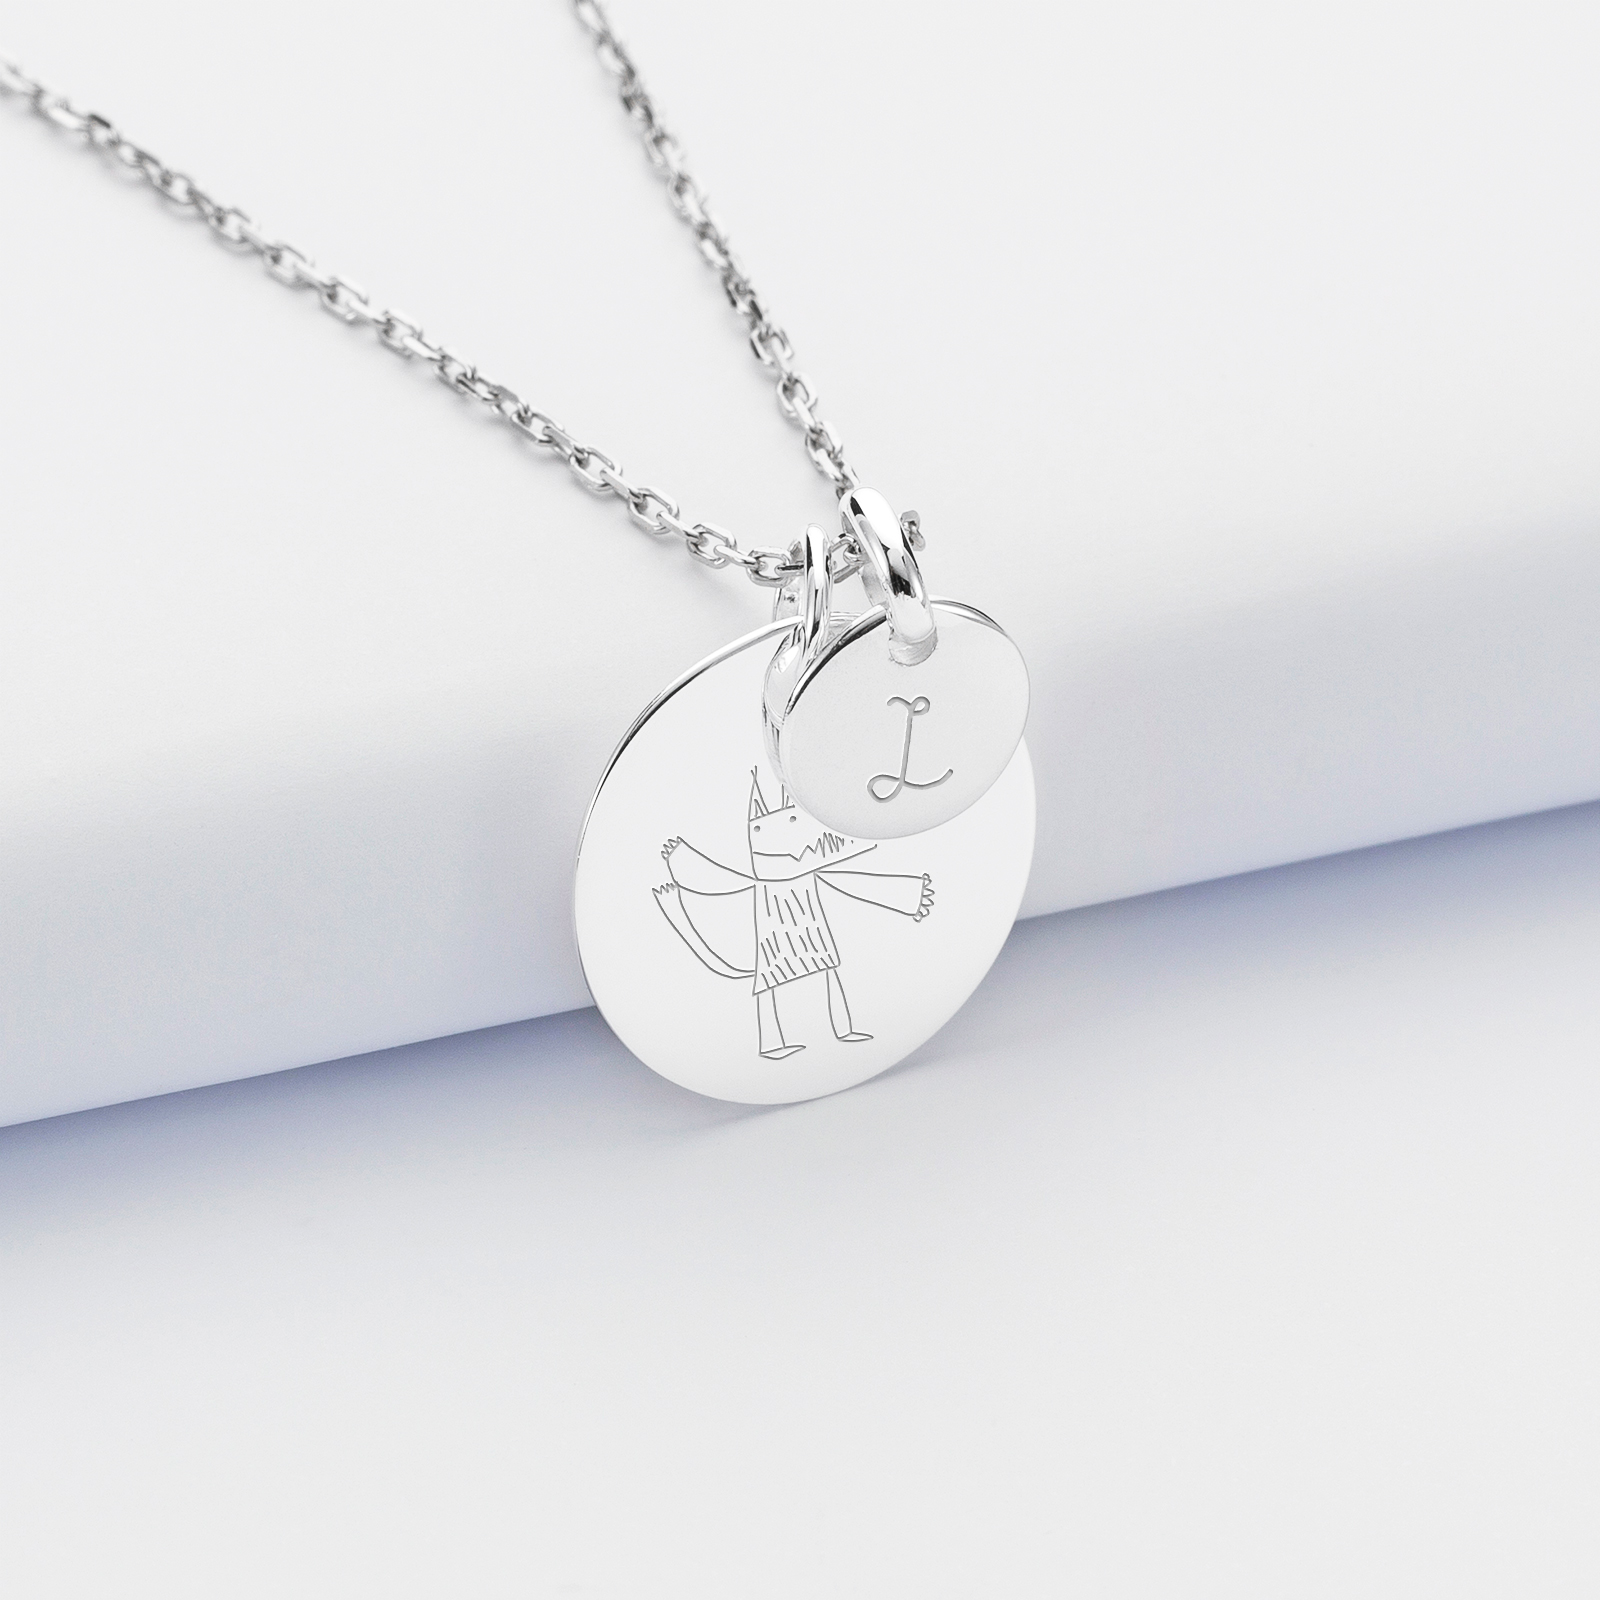 Personalised engraved silver medallion pendant 19mm and round charm 10mm sketch